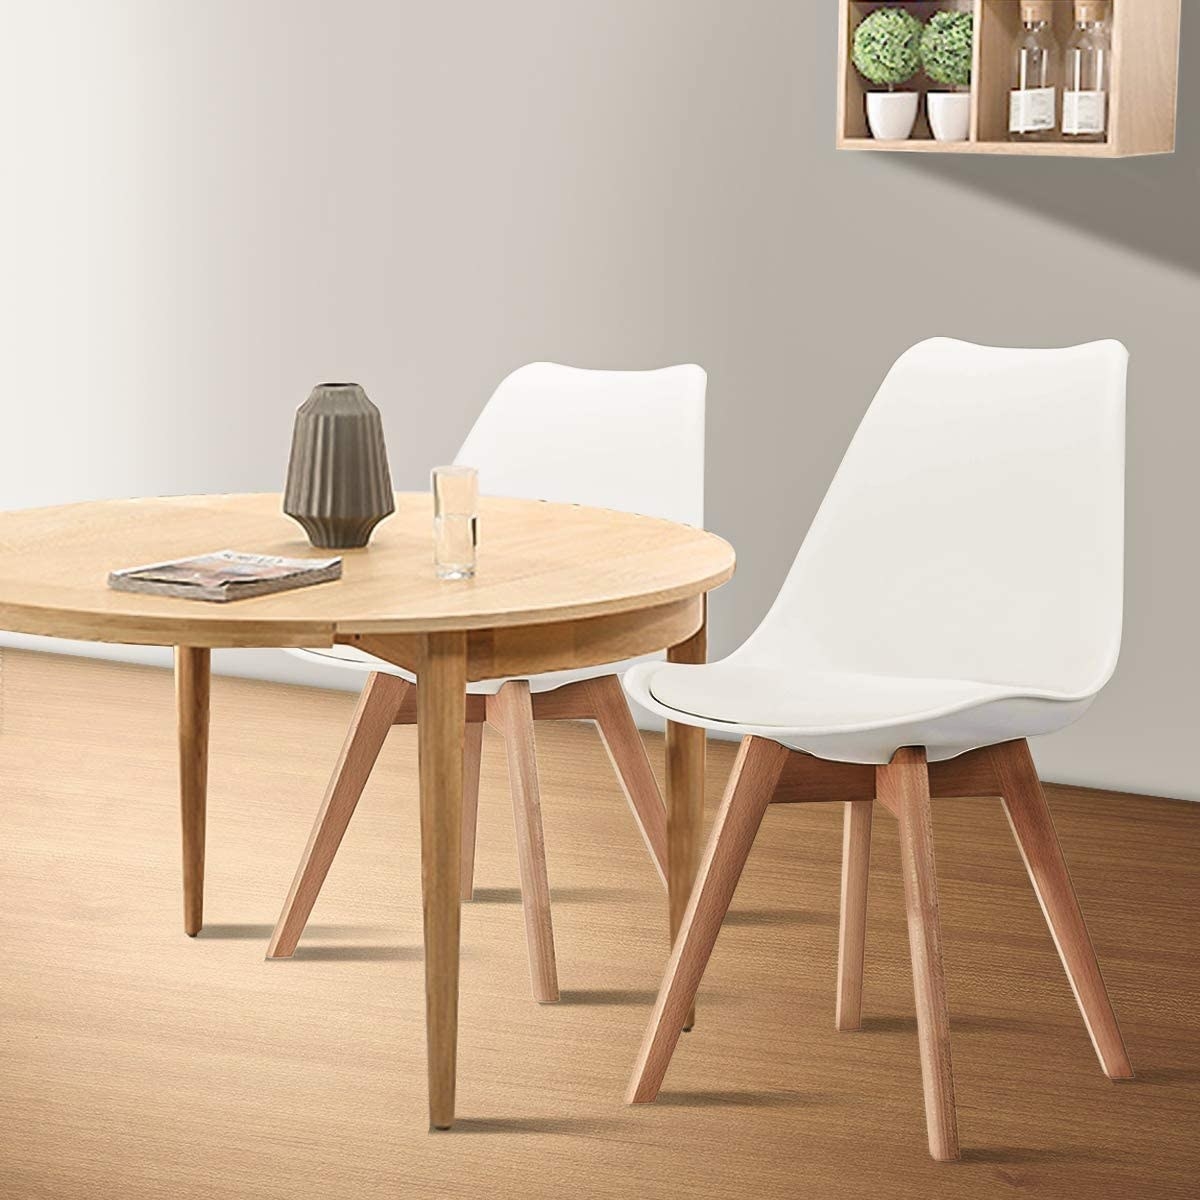 the two chairs by a small dining table